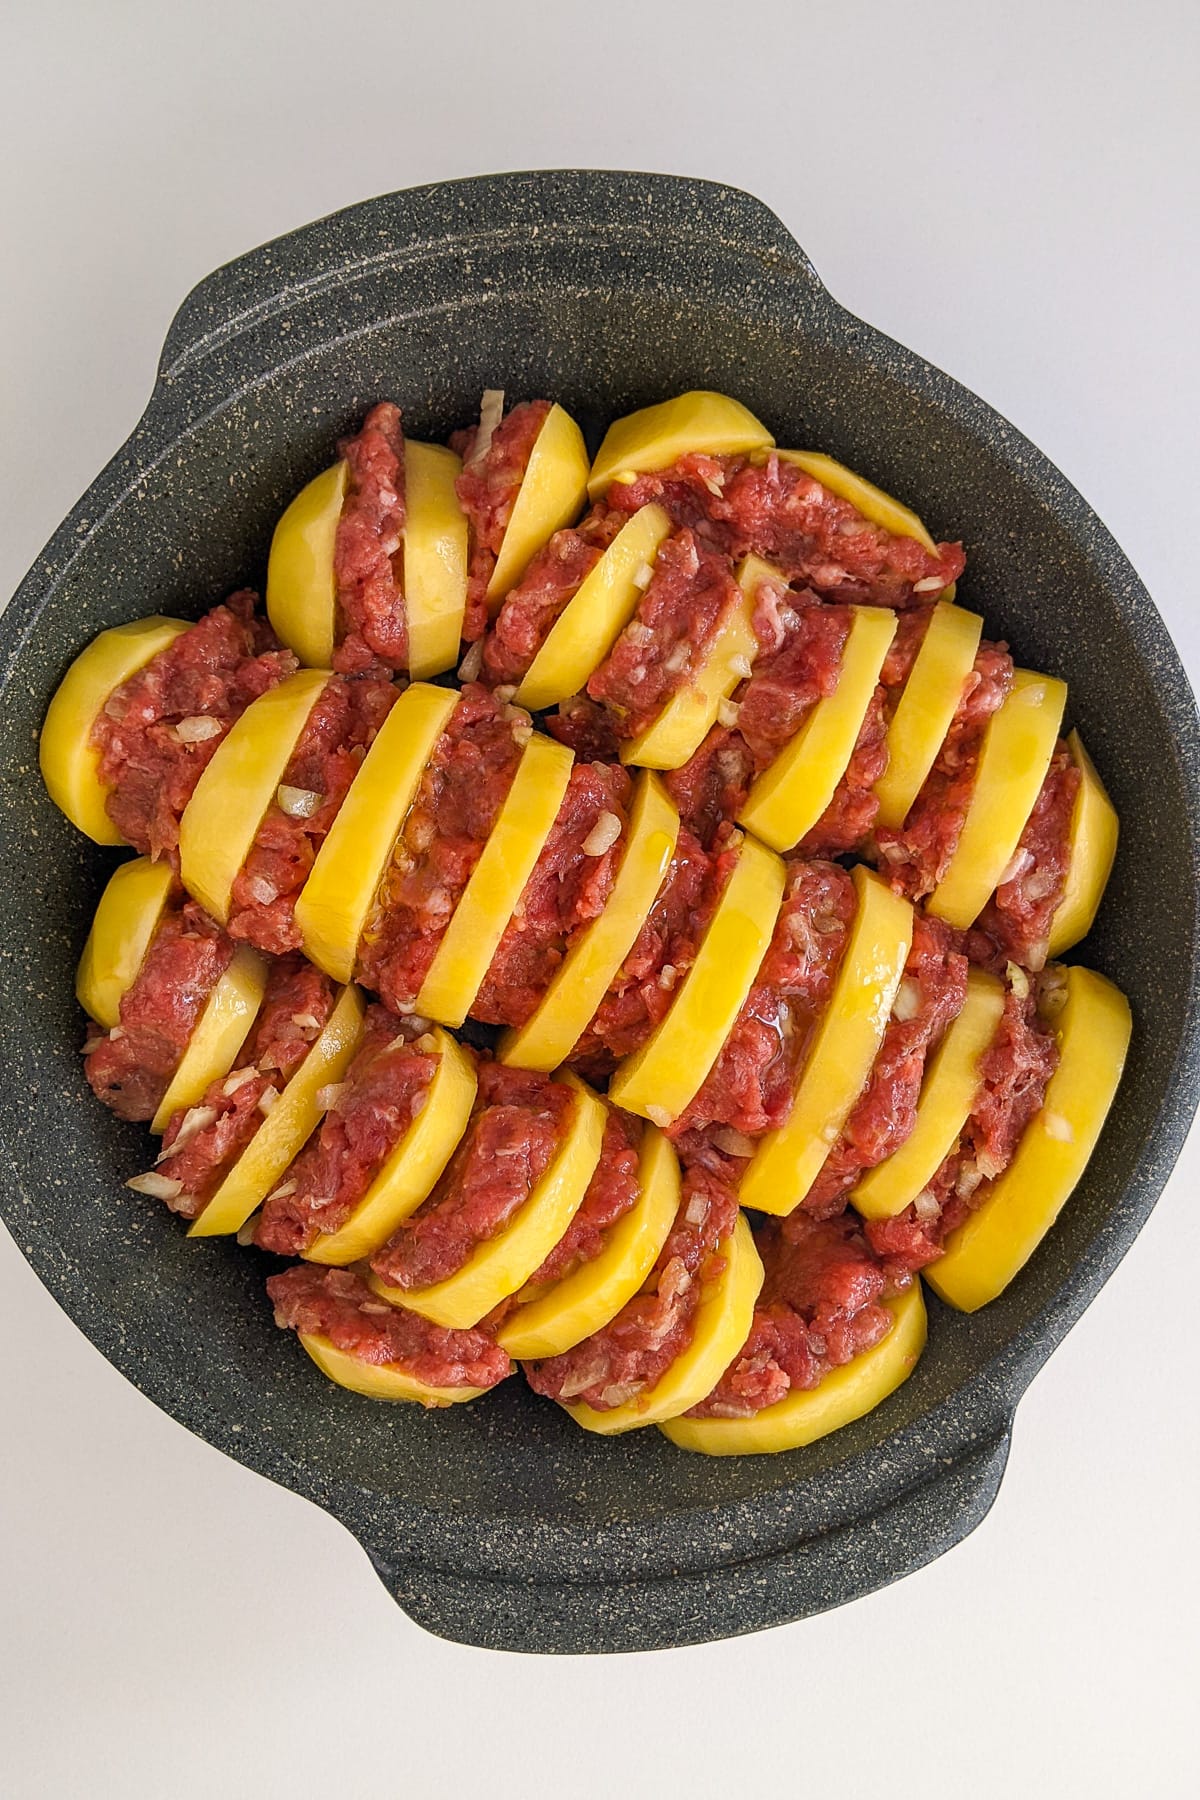 Sliced potatoes with ground beef burgers in a casserole.